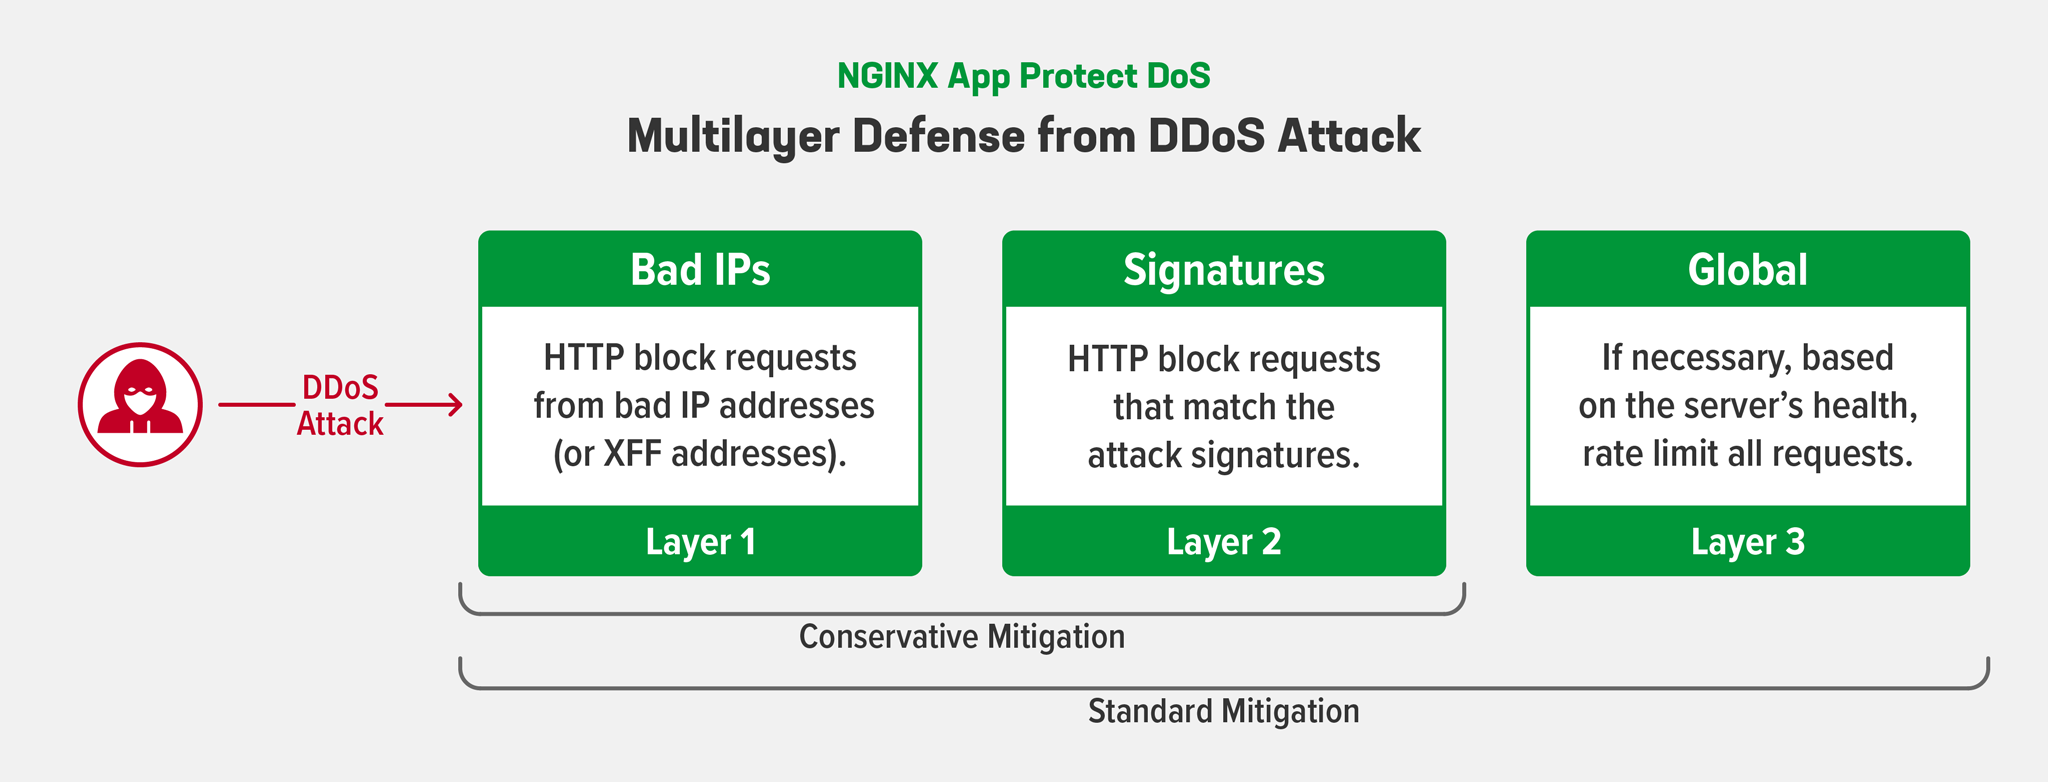 NGINX App Protect DOS provides multi-layer defense against attacks, incorporating conservative mitigation (block bad IP addresses and matching signatures) followed by standard mitigation (rate limiting) if necessary